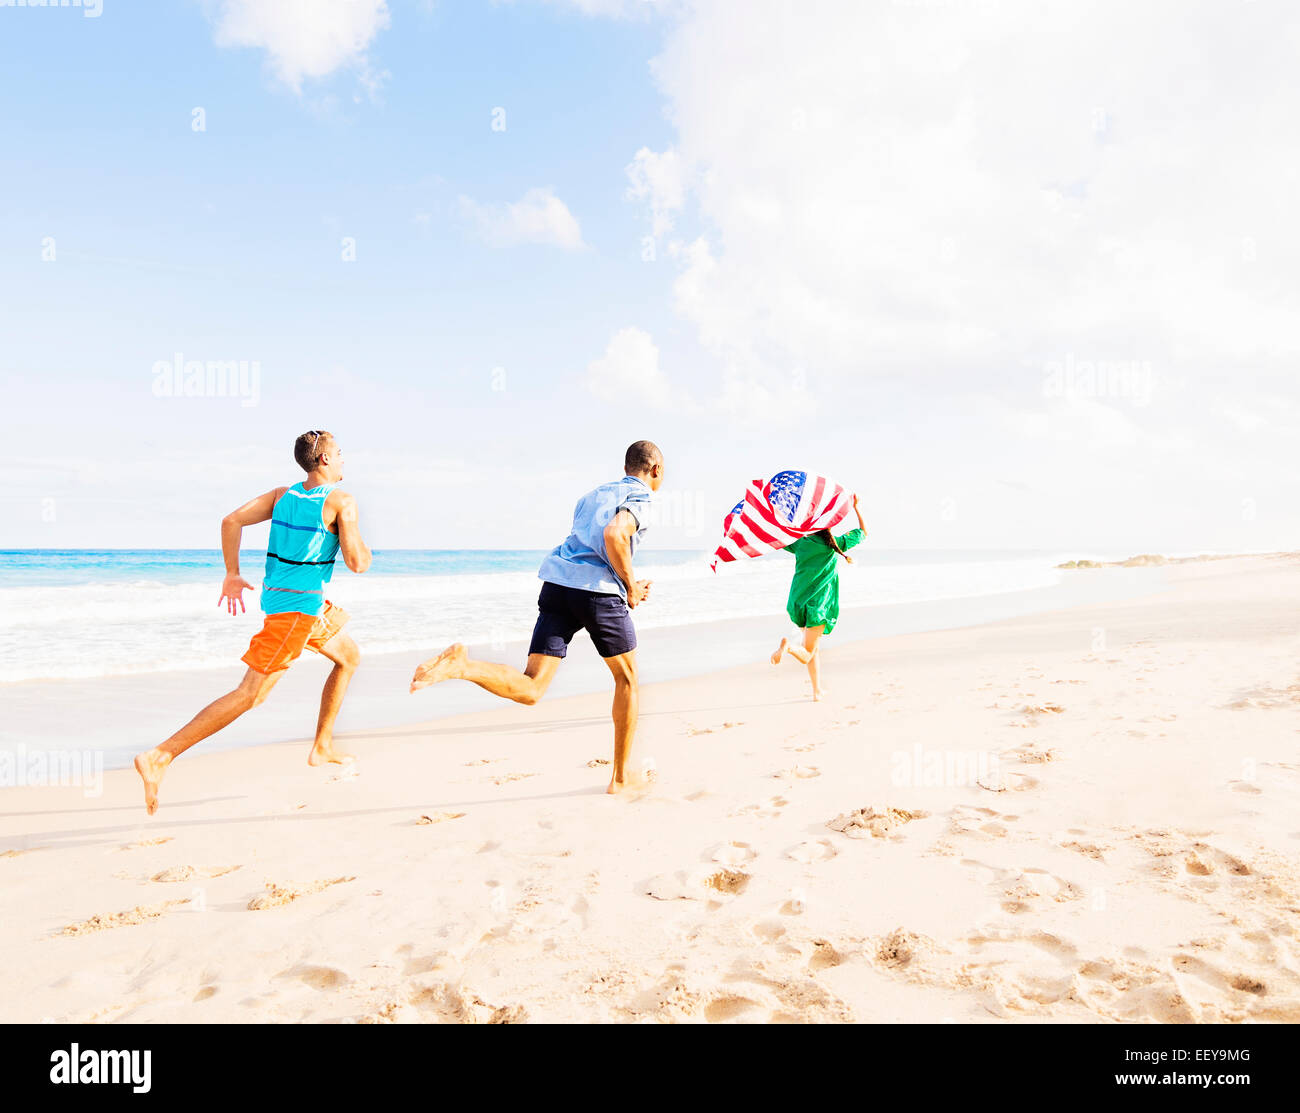 USA, Florida, Jupiter, Young people running with American flag on beach Stock Photo